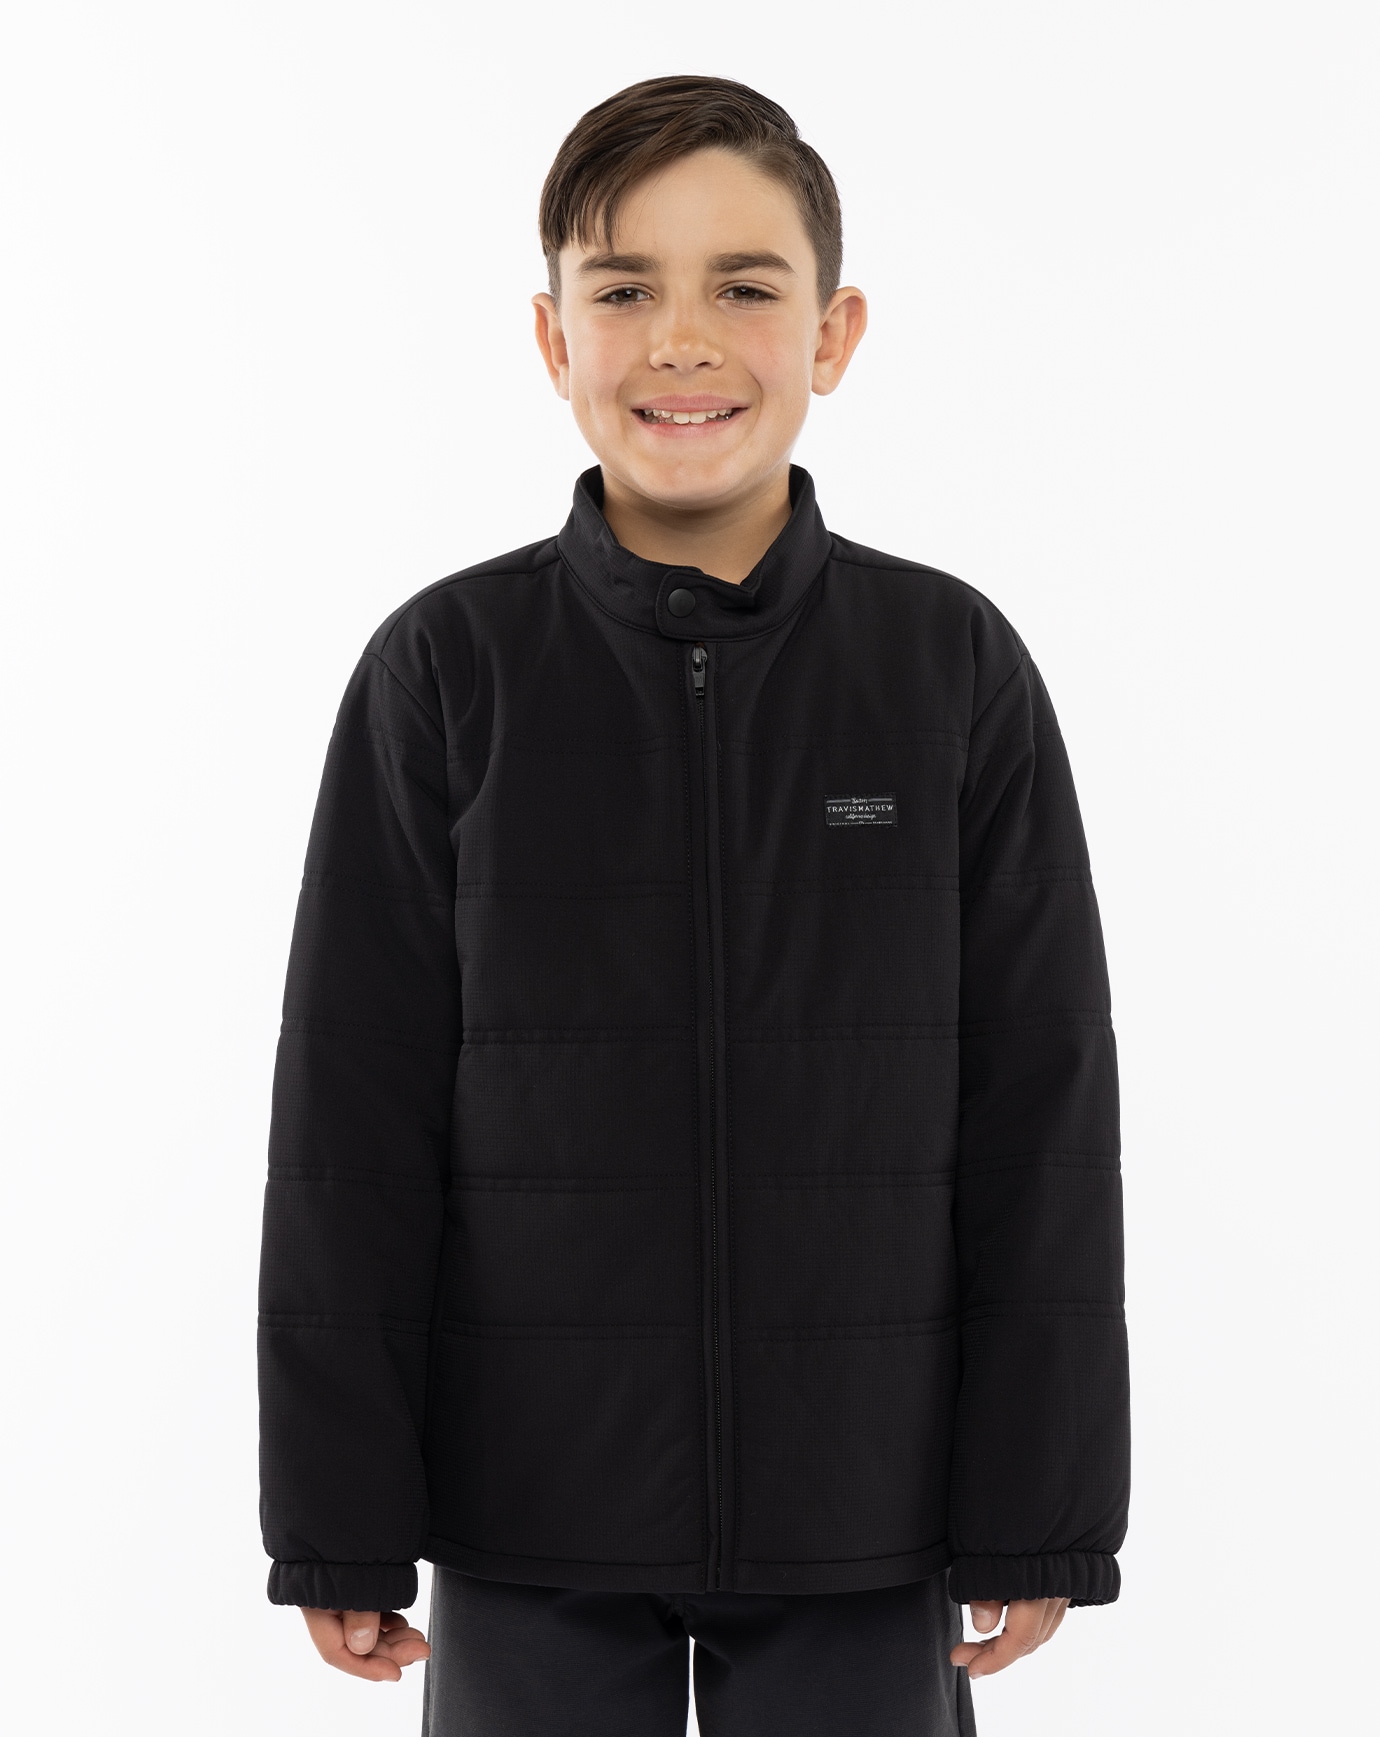 Related Product - INTERLUDE YOUTH PUFFER JACKET